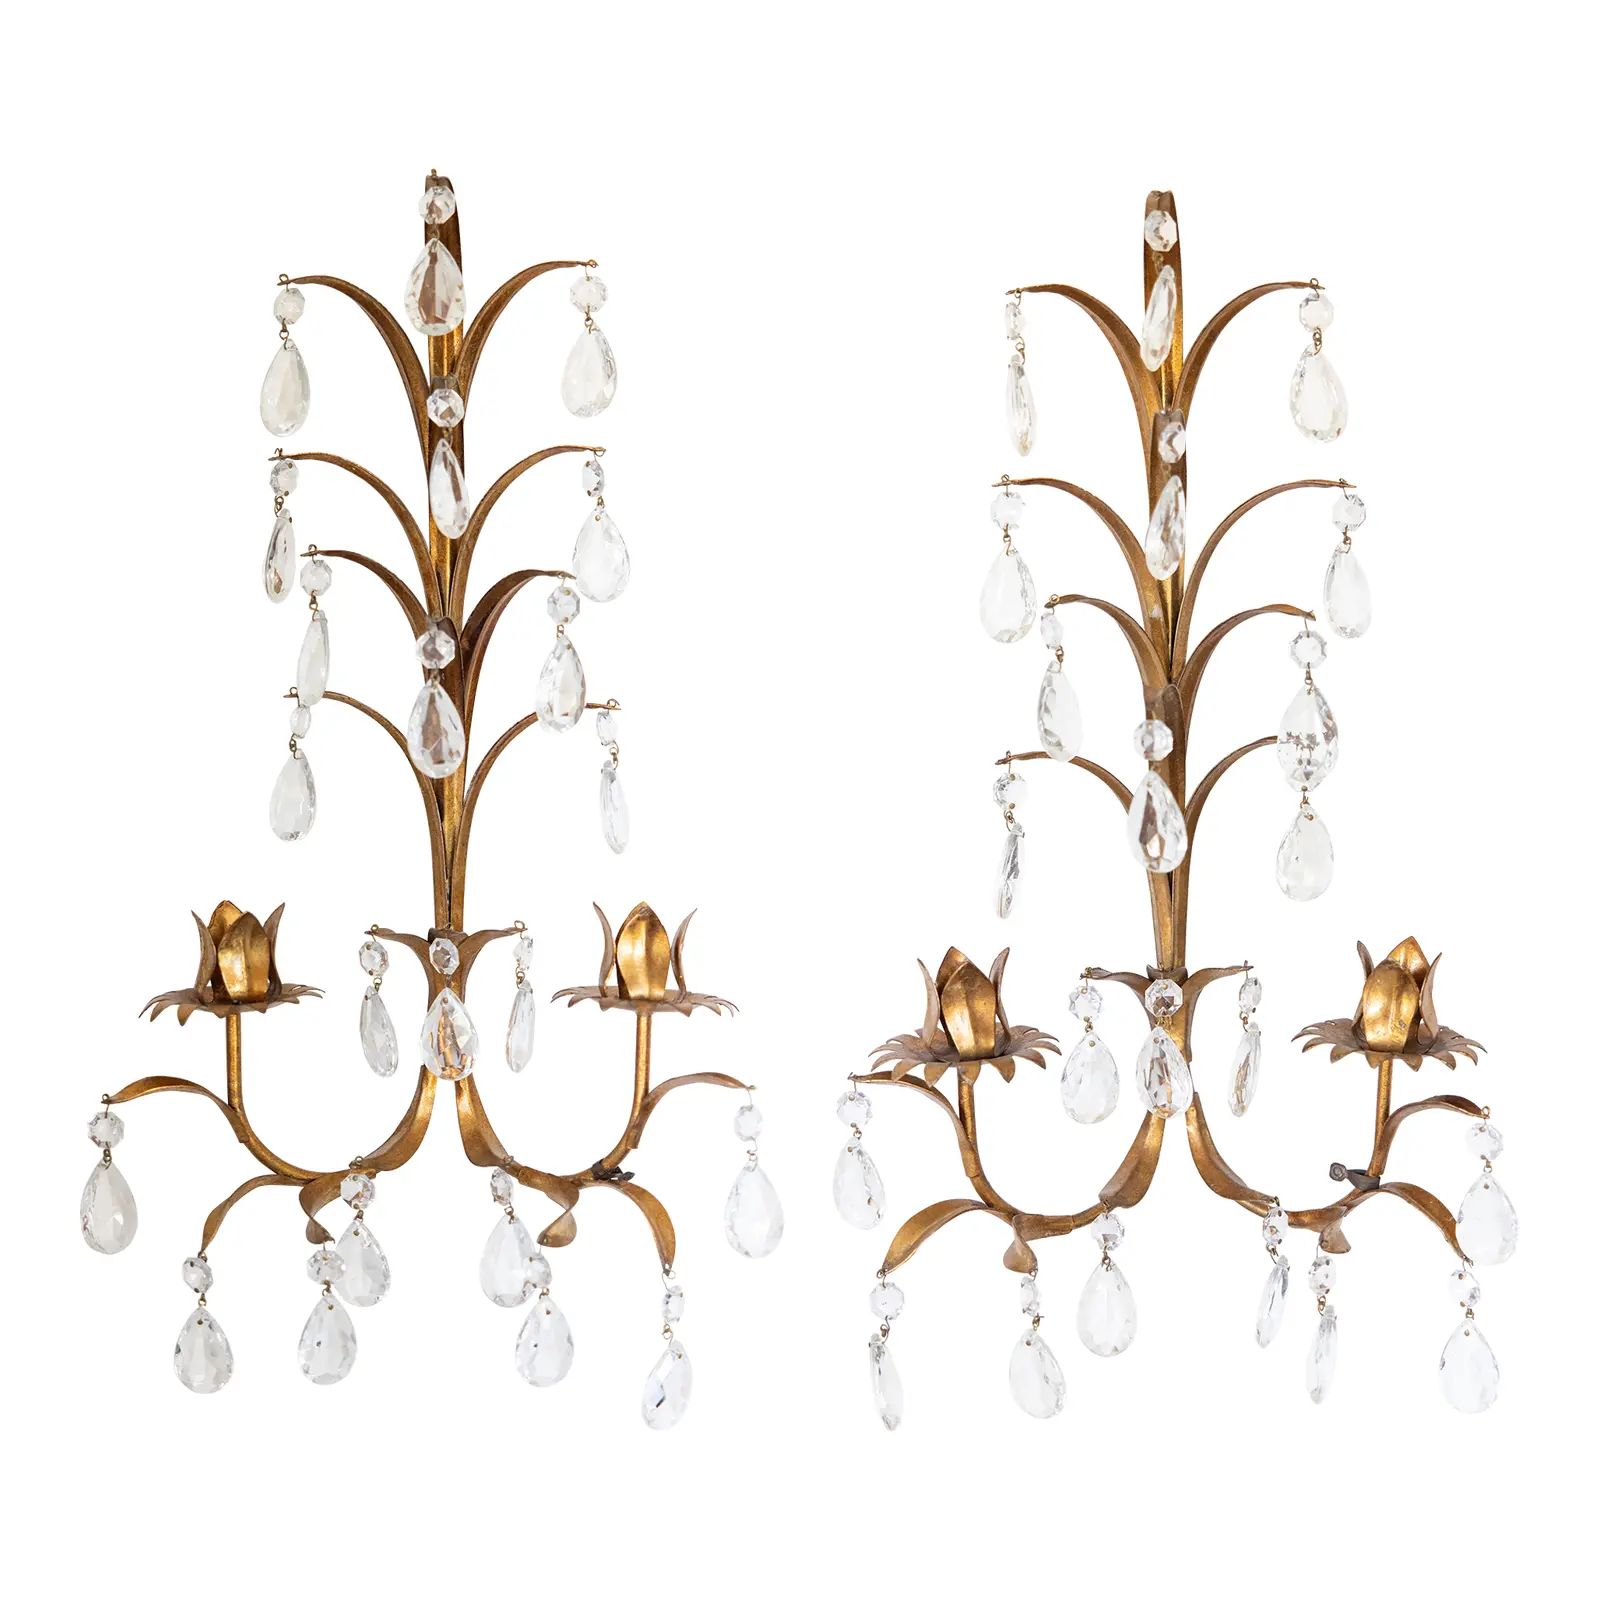 Vintage Italian Gilt Tole & Crystals Candelabra Candle Sconces - a Pair | Chairish